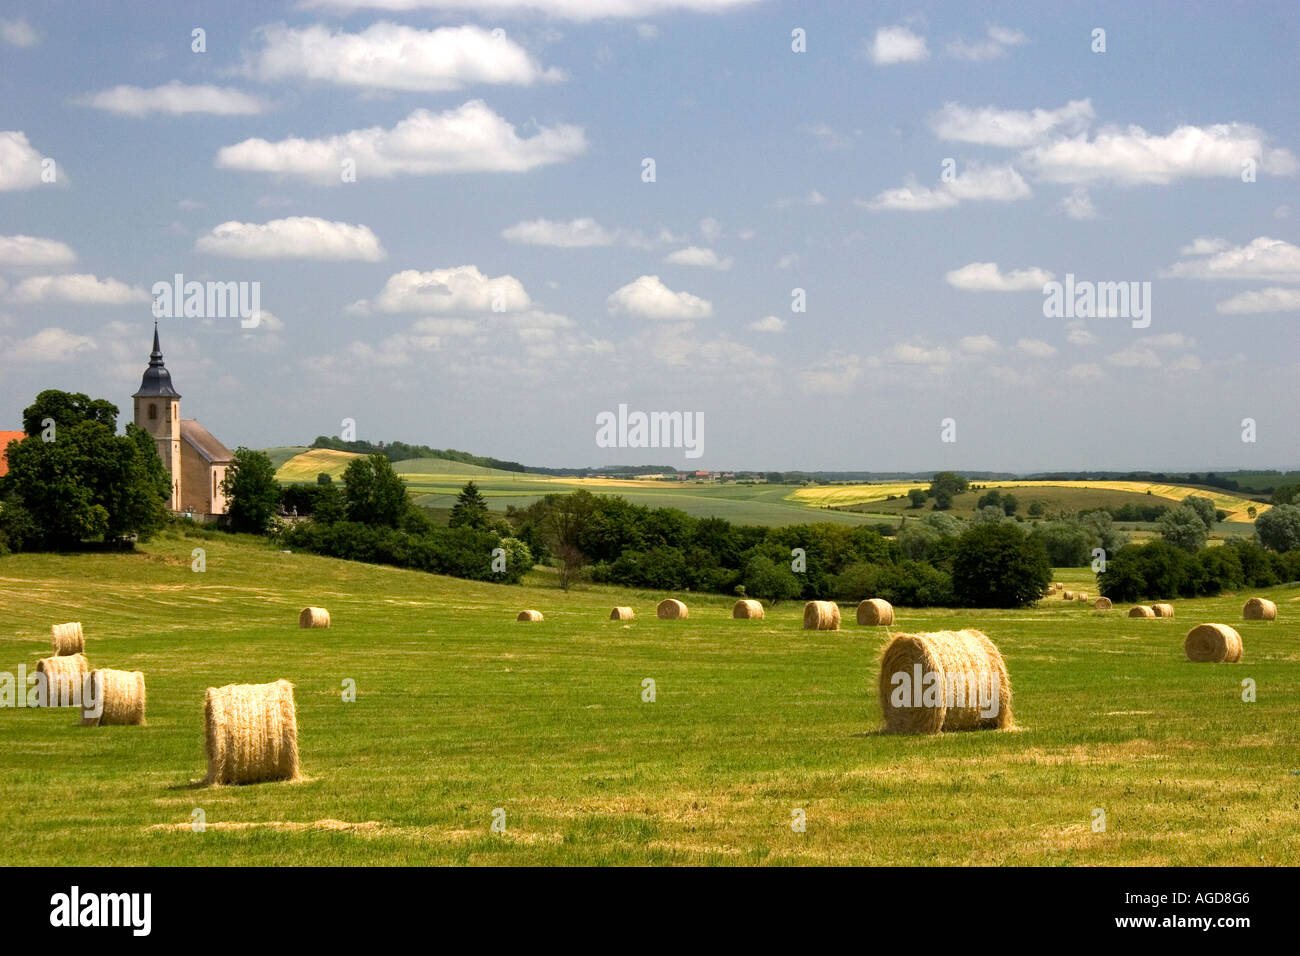 French countryside near Morhange, France. Stock Photo